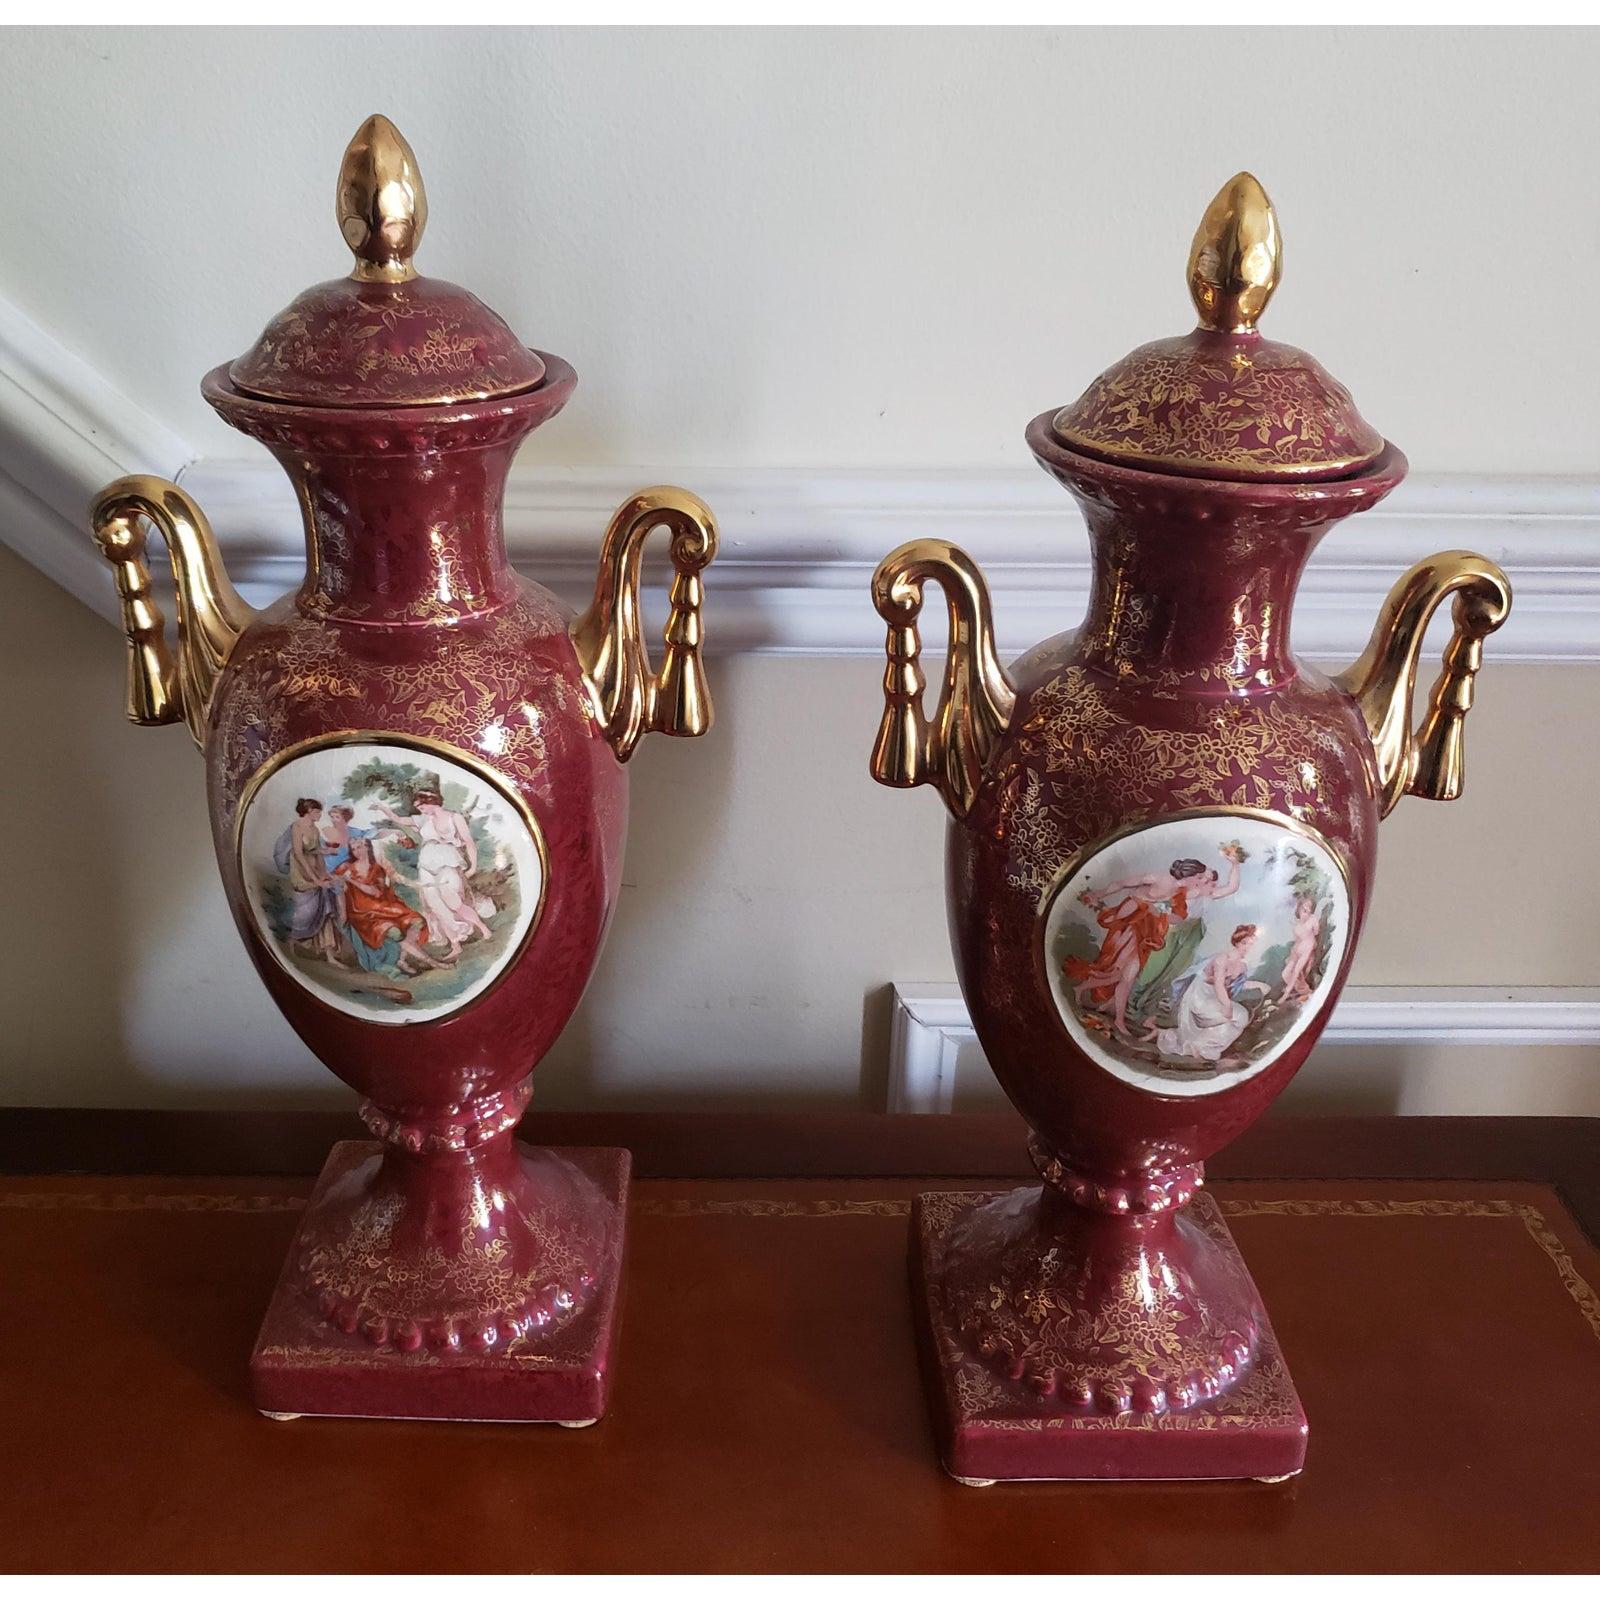 Antique Empire England Urn. This deep sienna piece feature 24 carat gold plated handles and fine floral patterns across all surfaces. These 1930s hand made urns set has been carefully kept and is still in great condition. The scene is of 4 women.